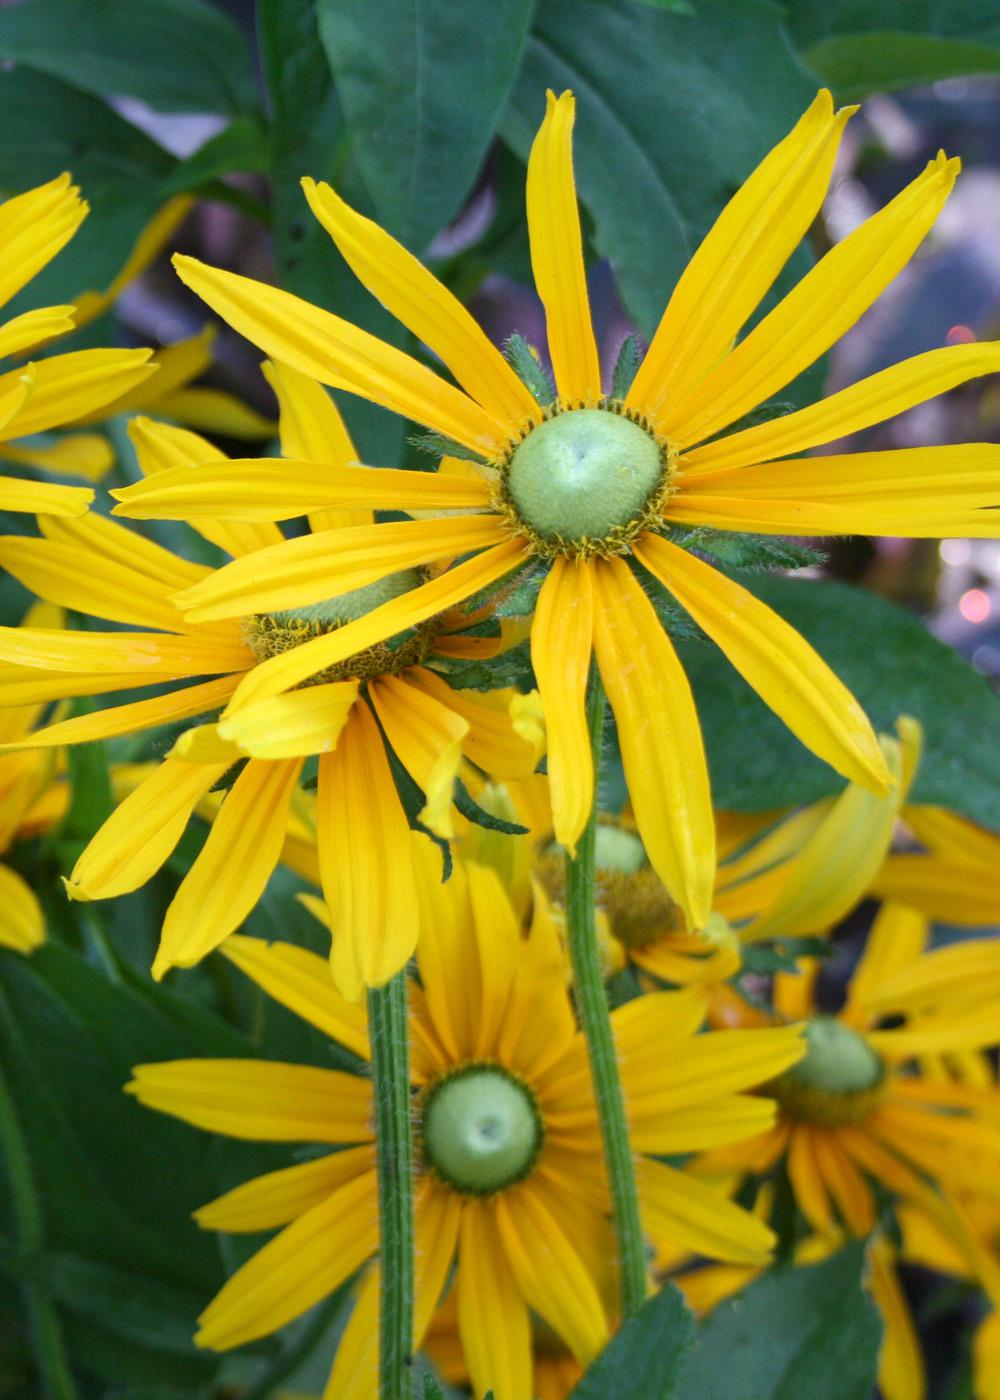 Irish Eyes is a black-eyed Susan variety that has a center cone of emerald green instead of black or dark brown. (Photo by MSU Extension Service/Gary Bachman)